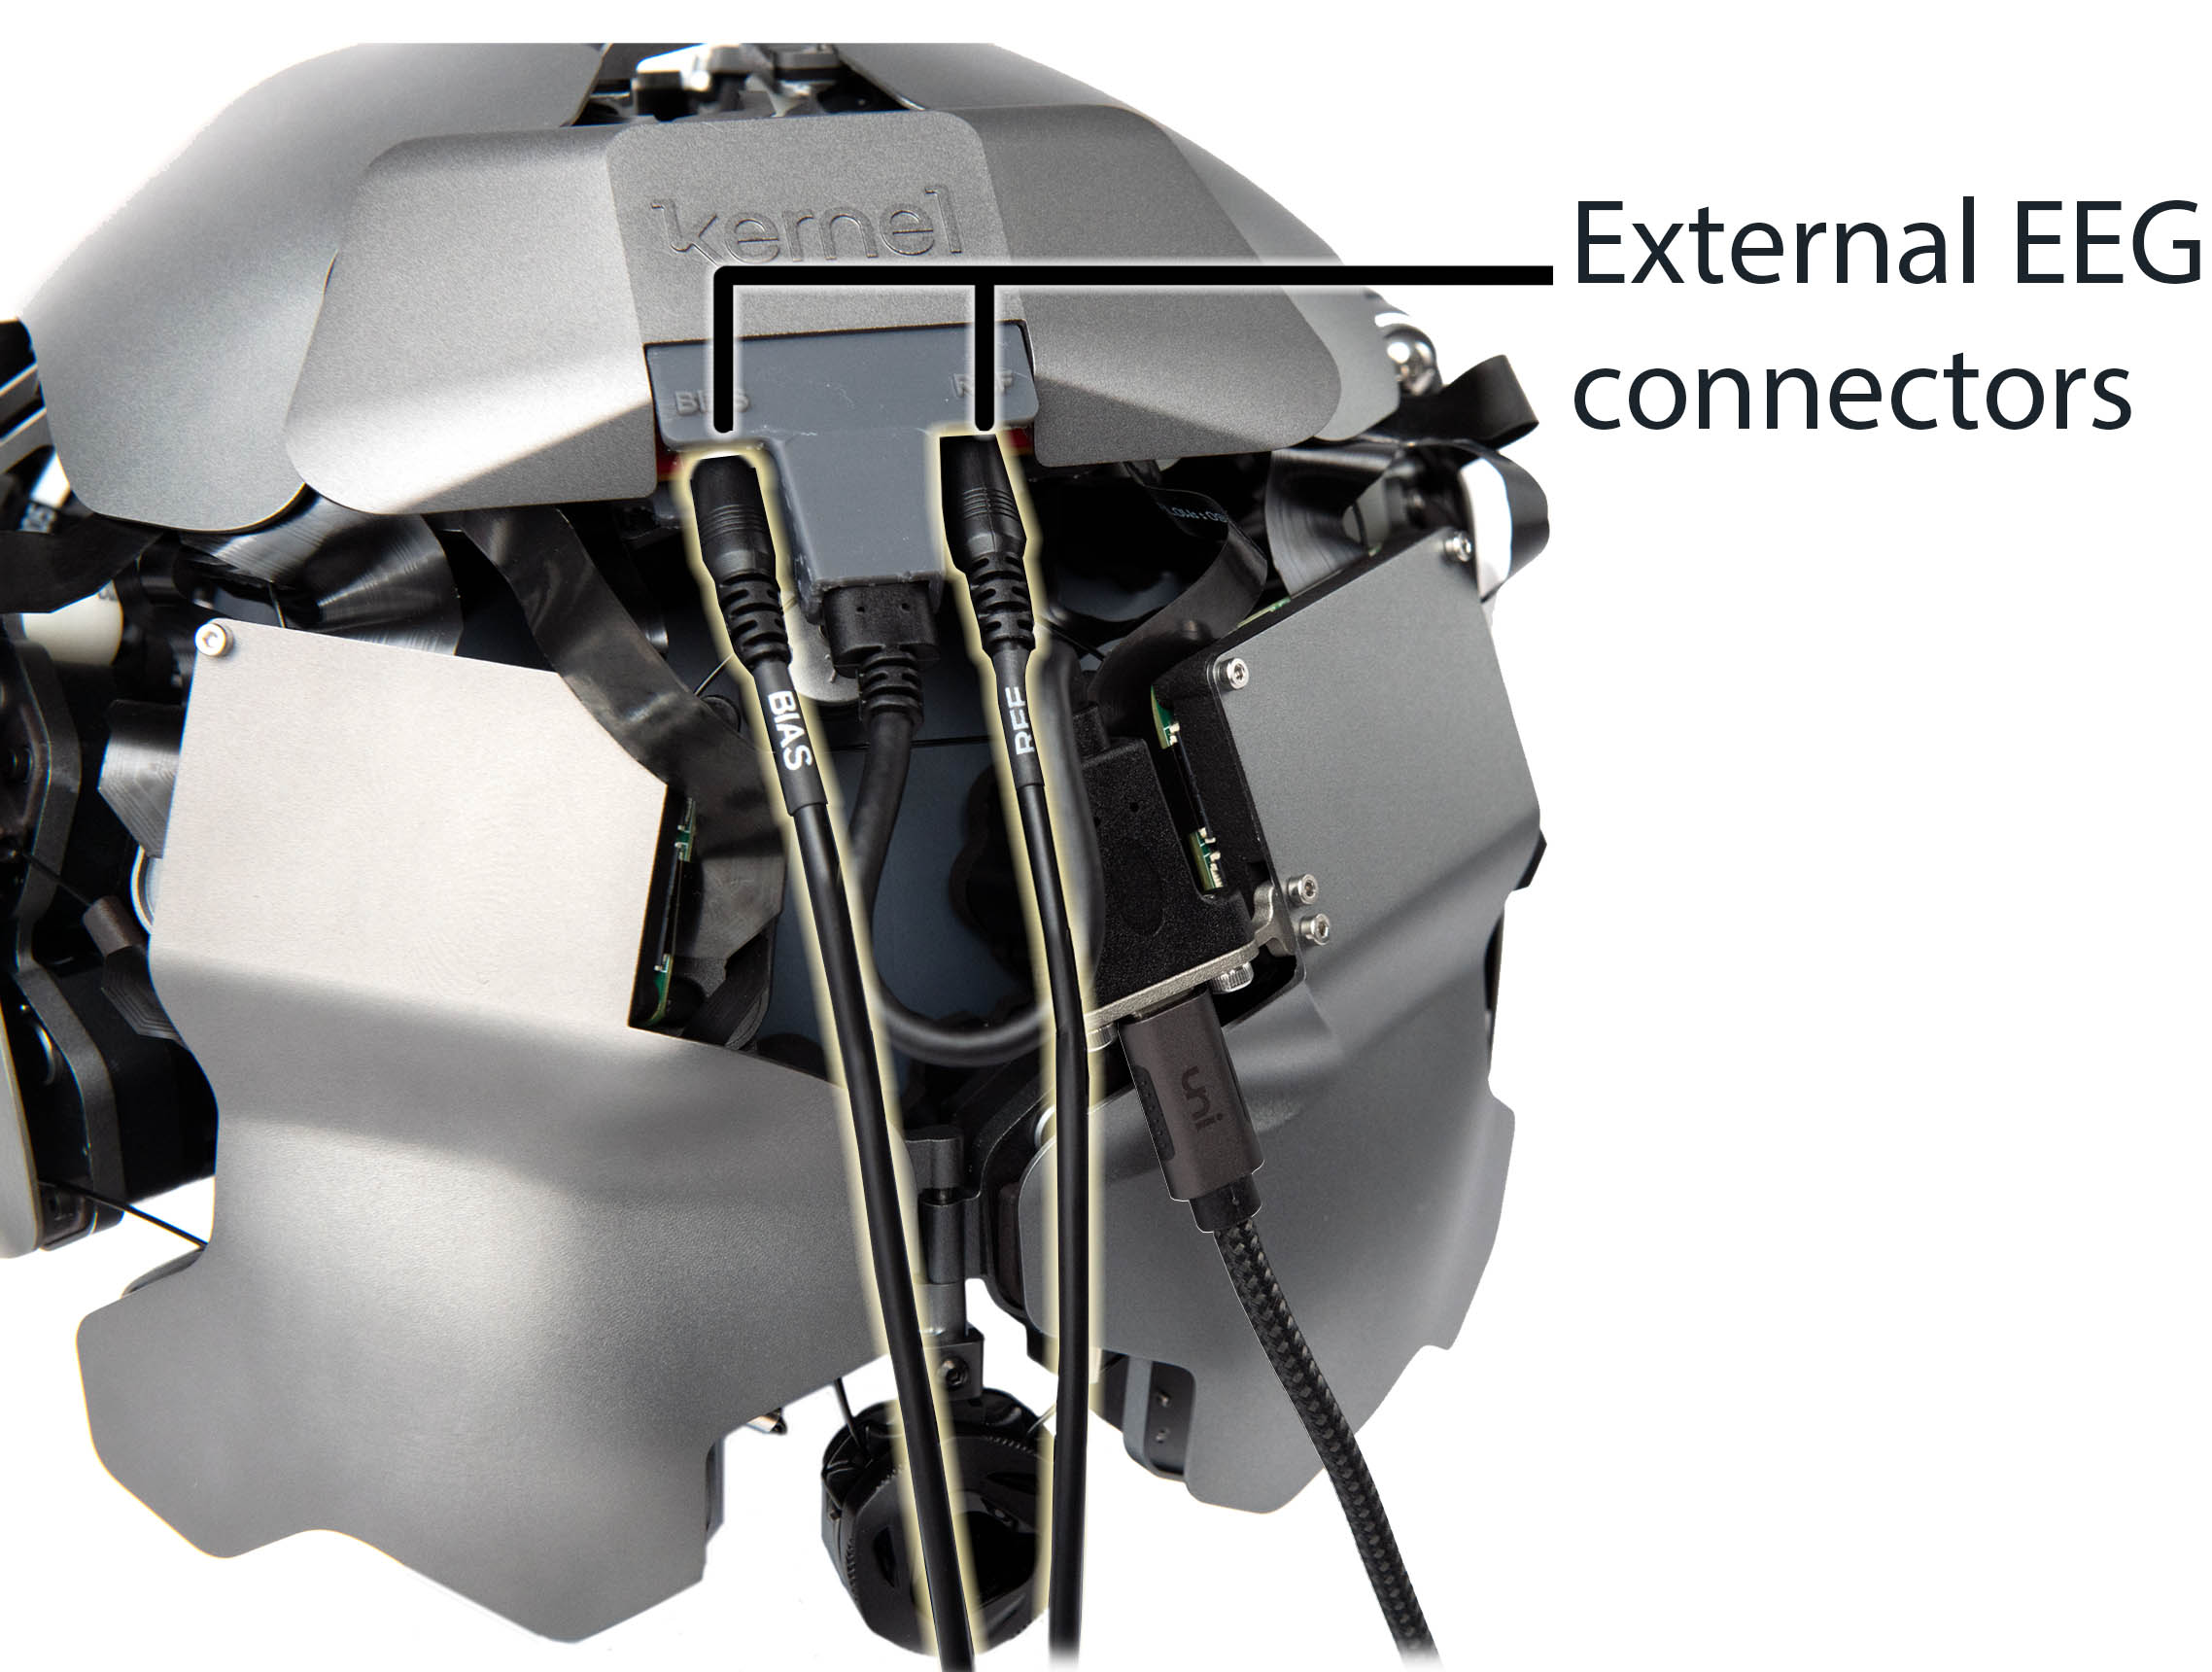 Image: Kernel Flow headset with the External EEG connectors called out.